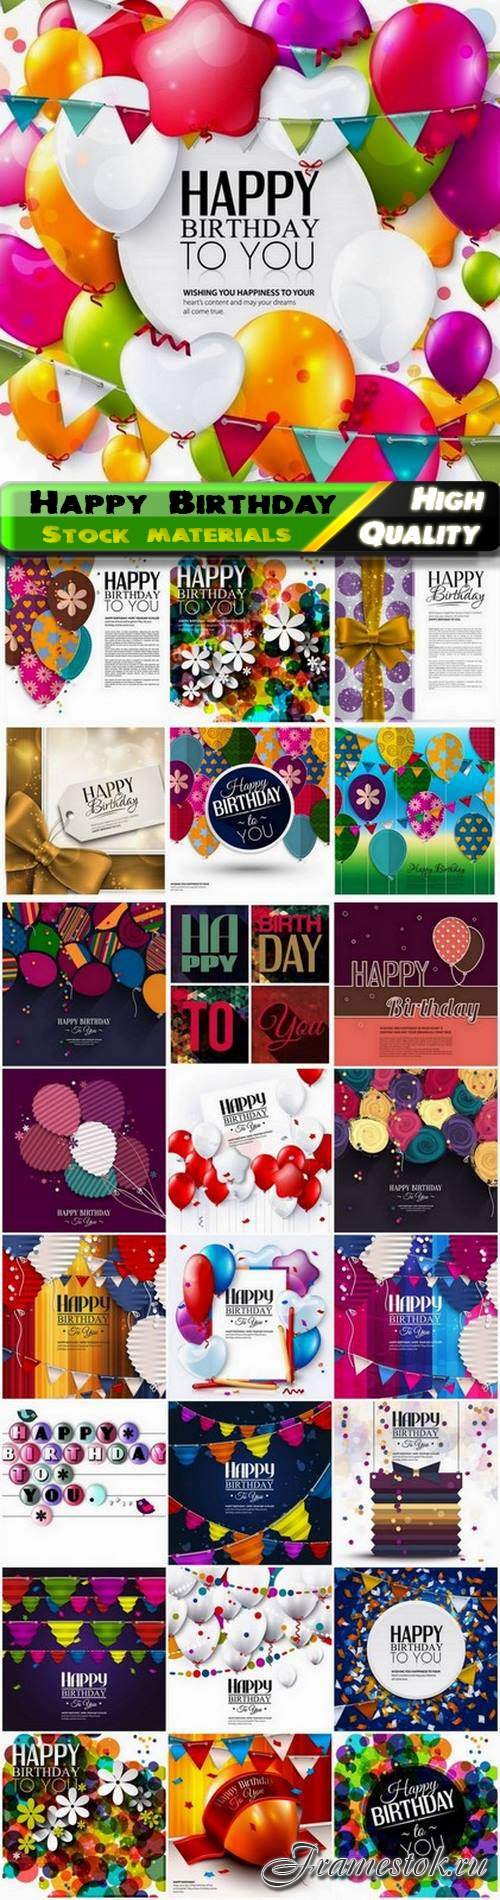 Happy Birthday holiday card with balloons flags confetti - 25 Eps